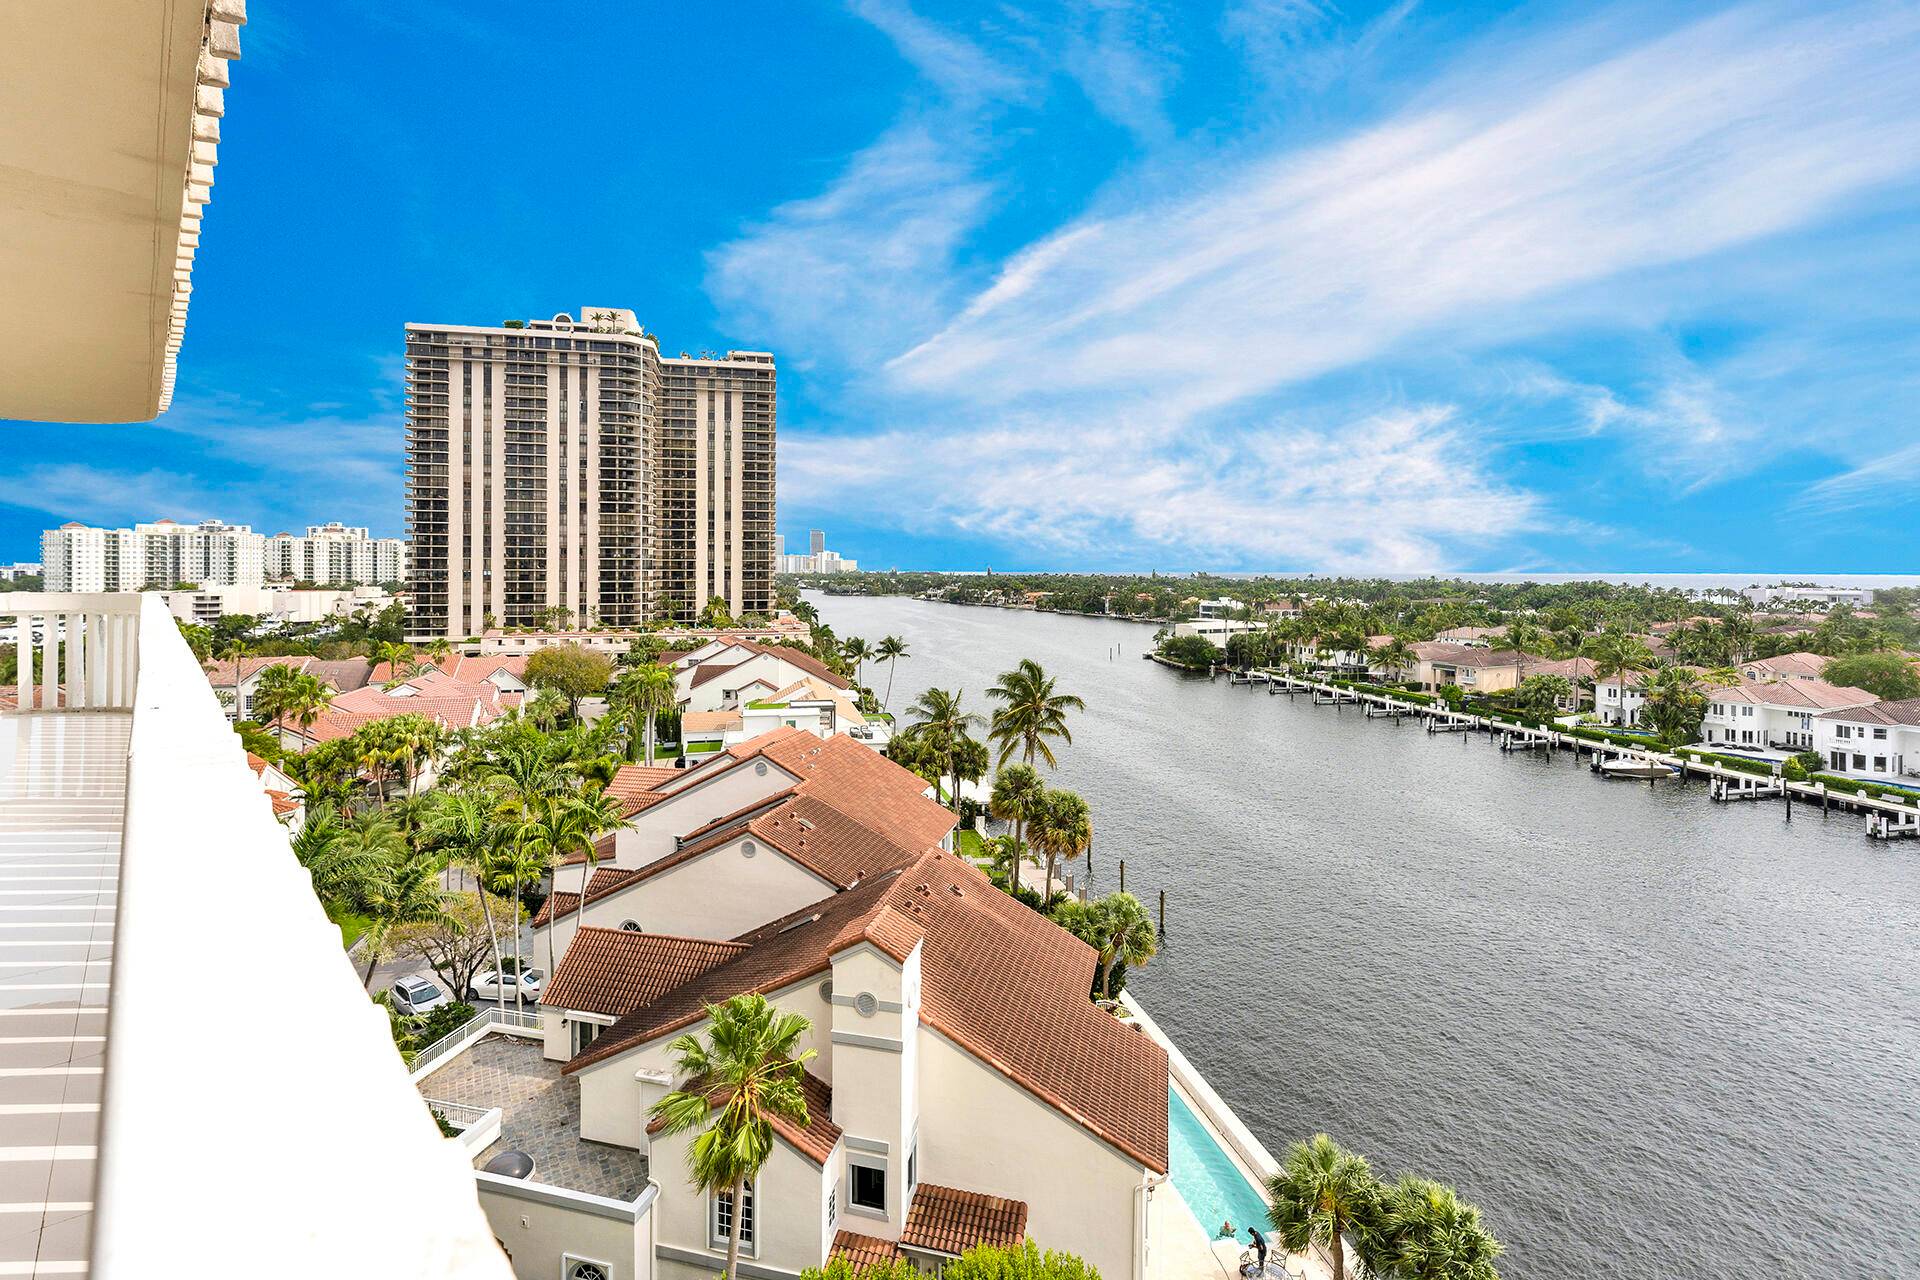 Welcome to a luxurious condo nestled along the waterfront, boasting unparalleled views of the intracoastal Atlantic Ocean.